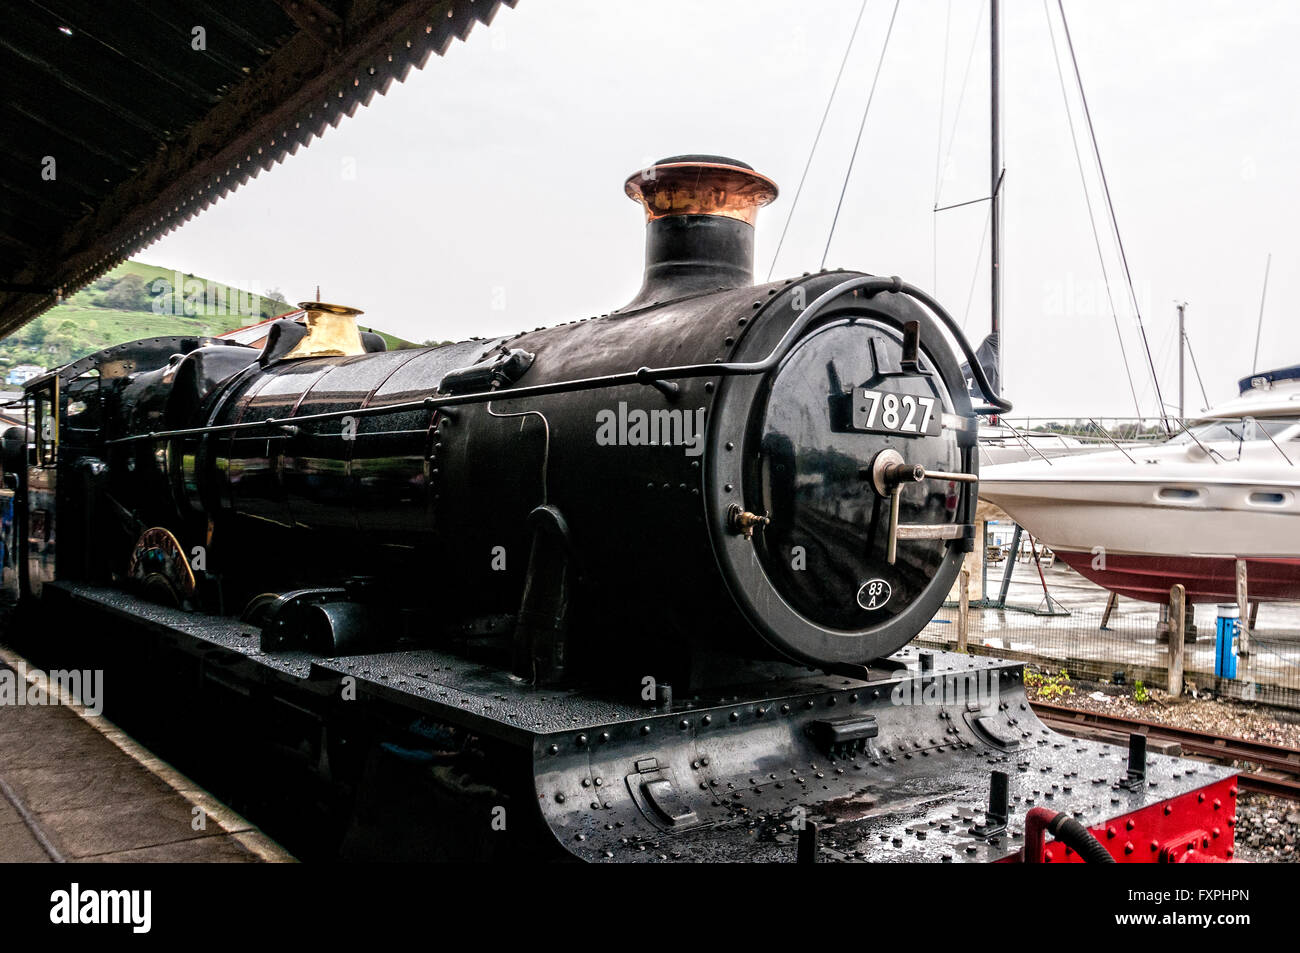 The restored steam locomotive Lydham Manor stands gleaming at the platform of Kingswear Railway Station on a damp misty day Stock Photo